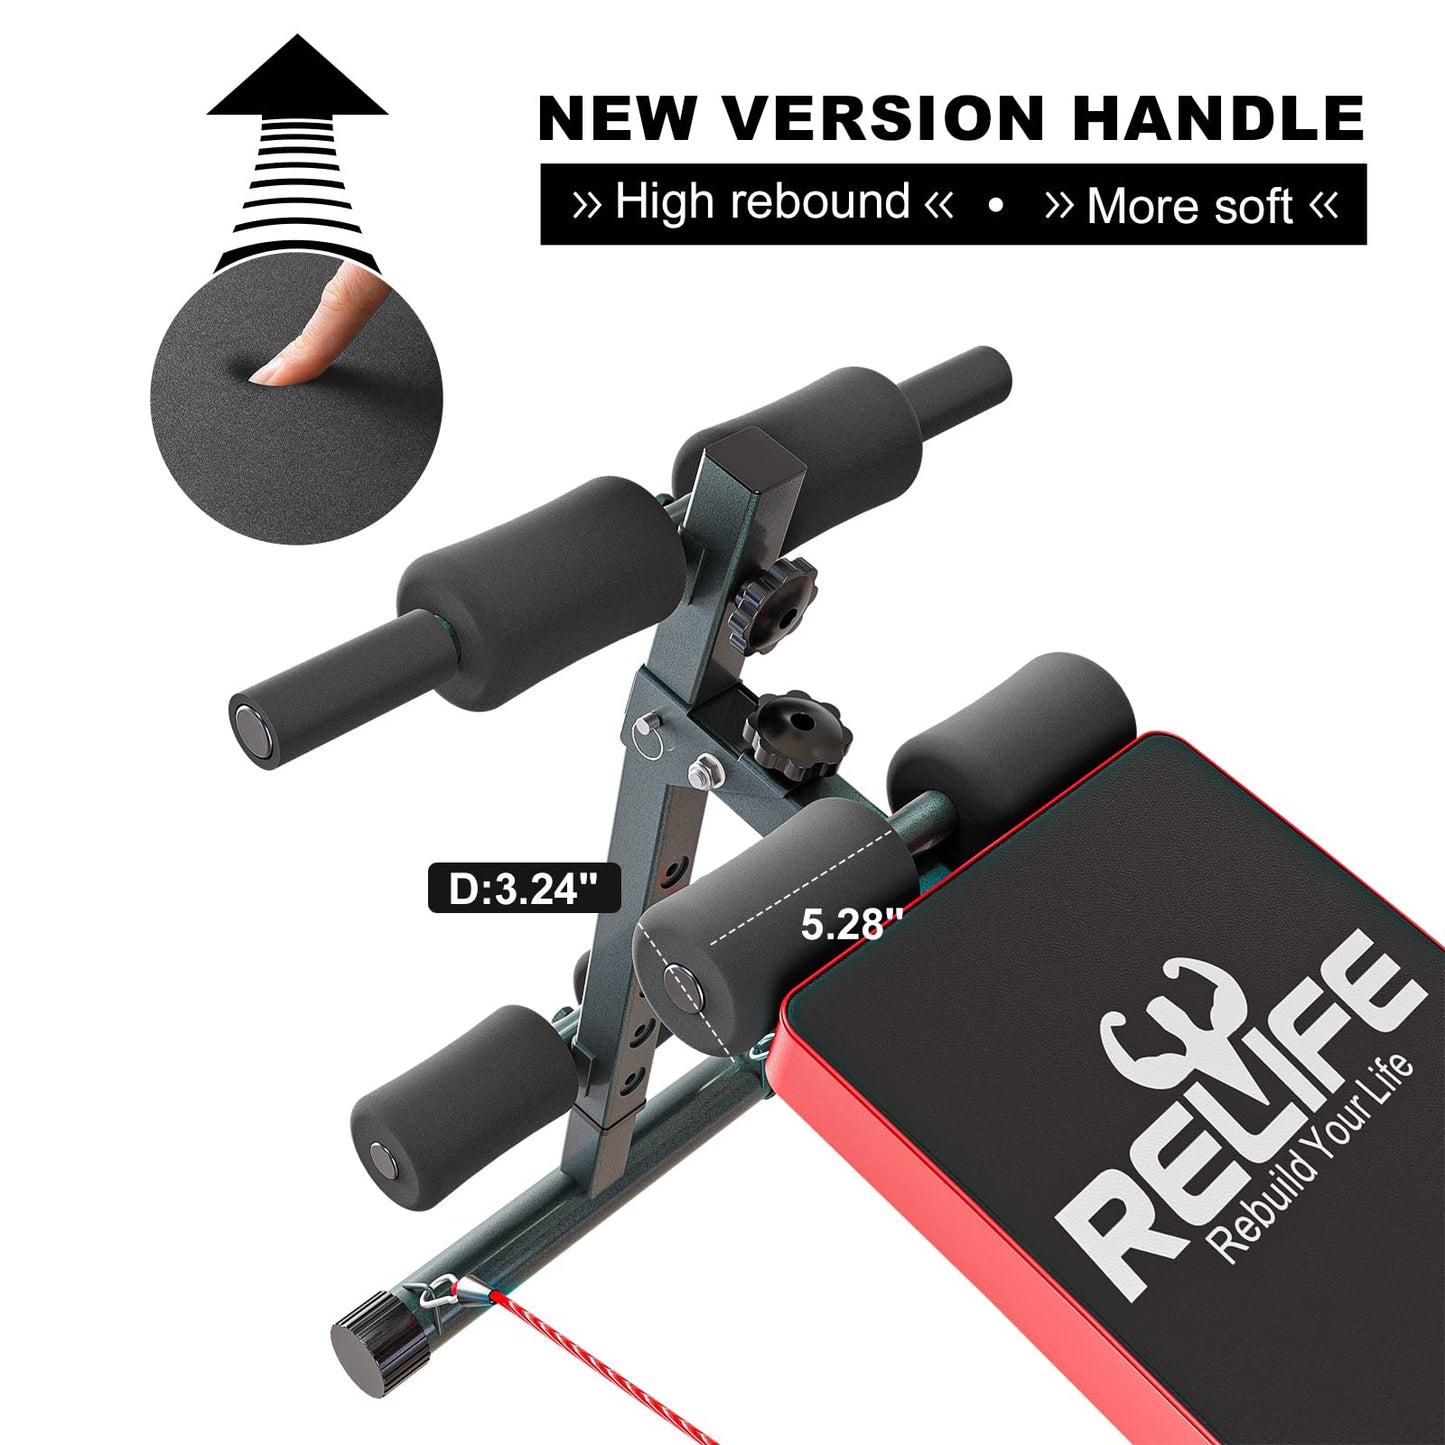 RELIFE Multifunction Sit-up Bench